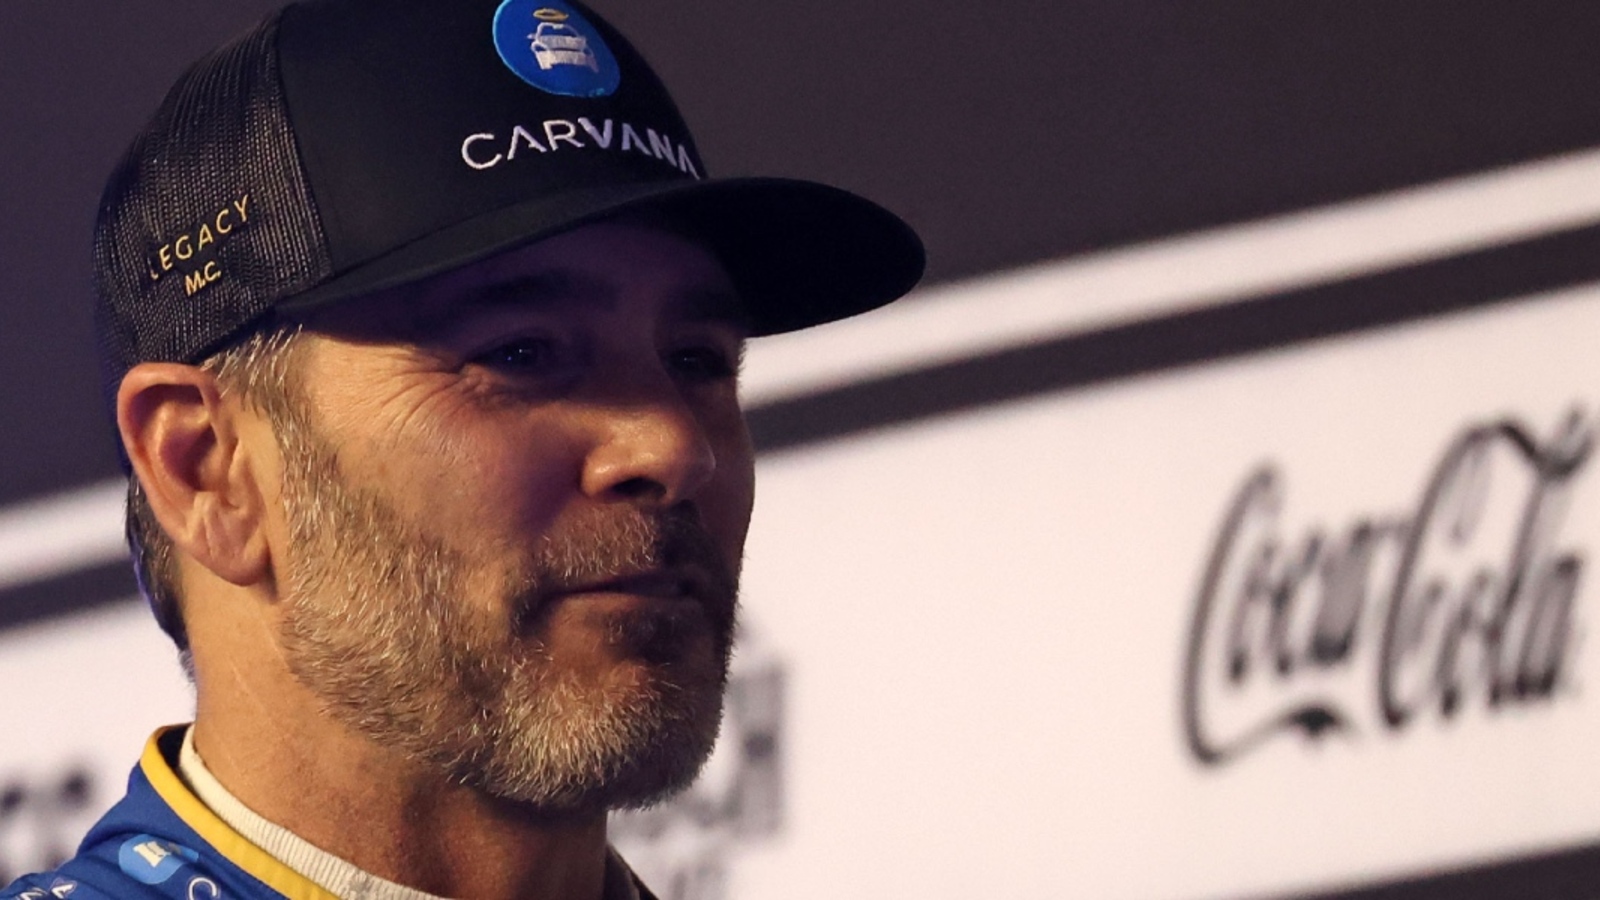 Jimmie Johnson to broadcast Indianapolis 500, race in Coca-Cola 600 in same day for NBC Sports